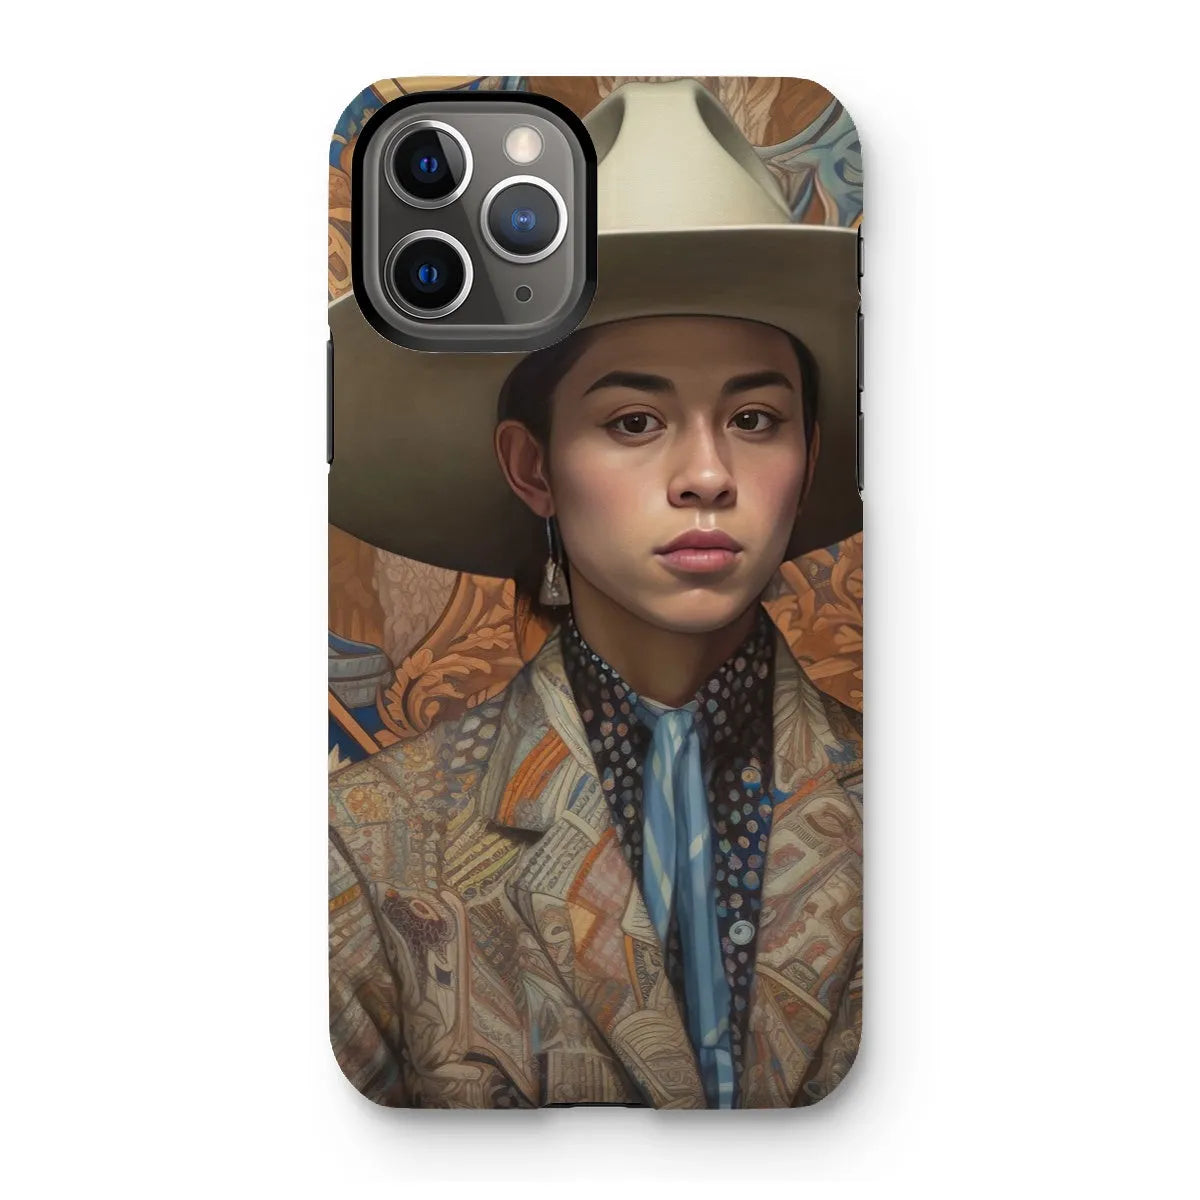 Angel The Transgender Cowboy - F2m Outlaw Art Phone Case - Iphone 11 Pro / Matte - Mobile Phone Cases - Aesthetic Art